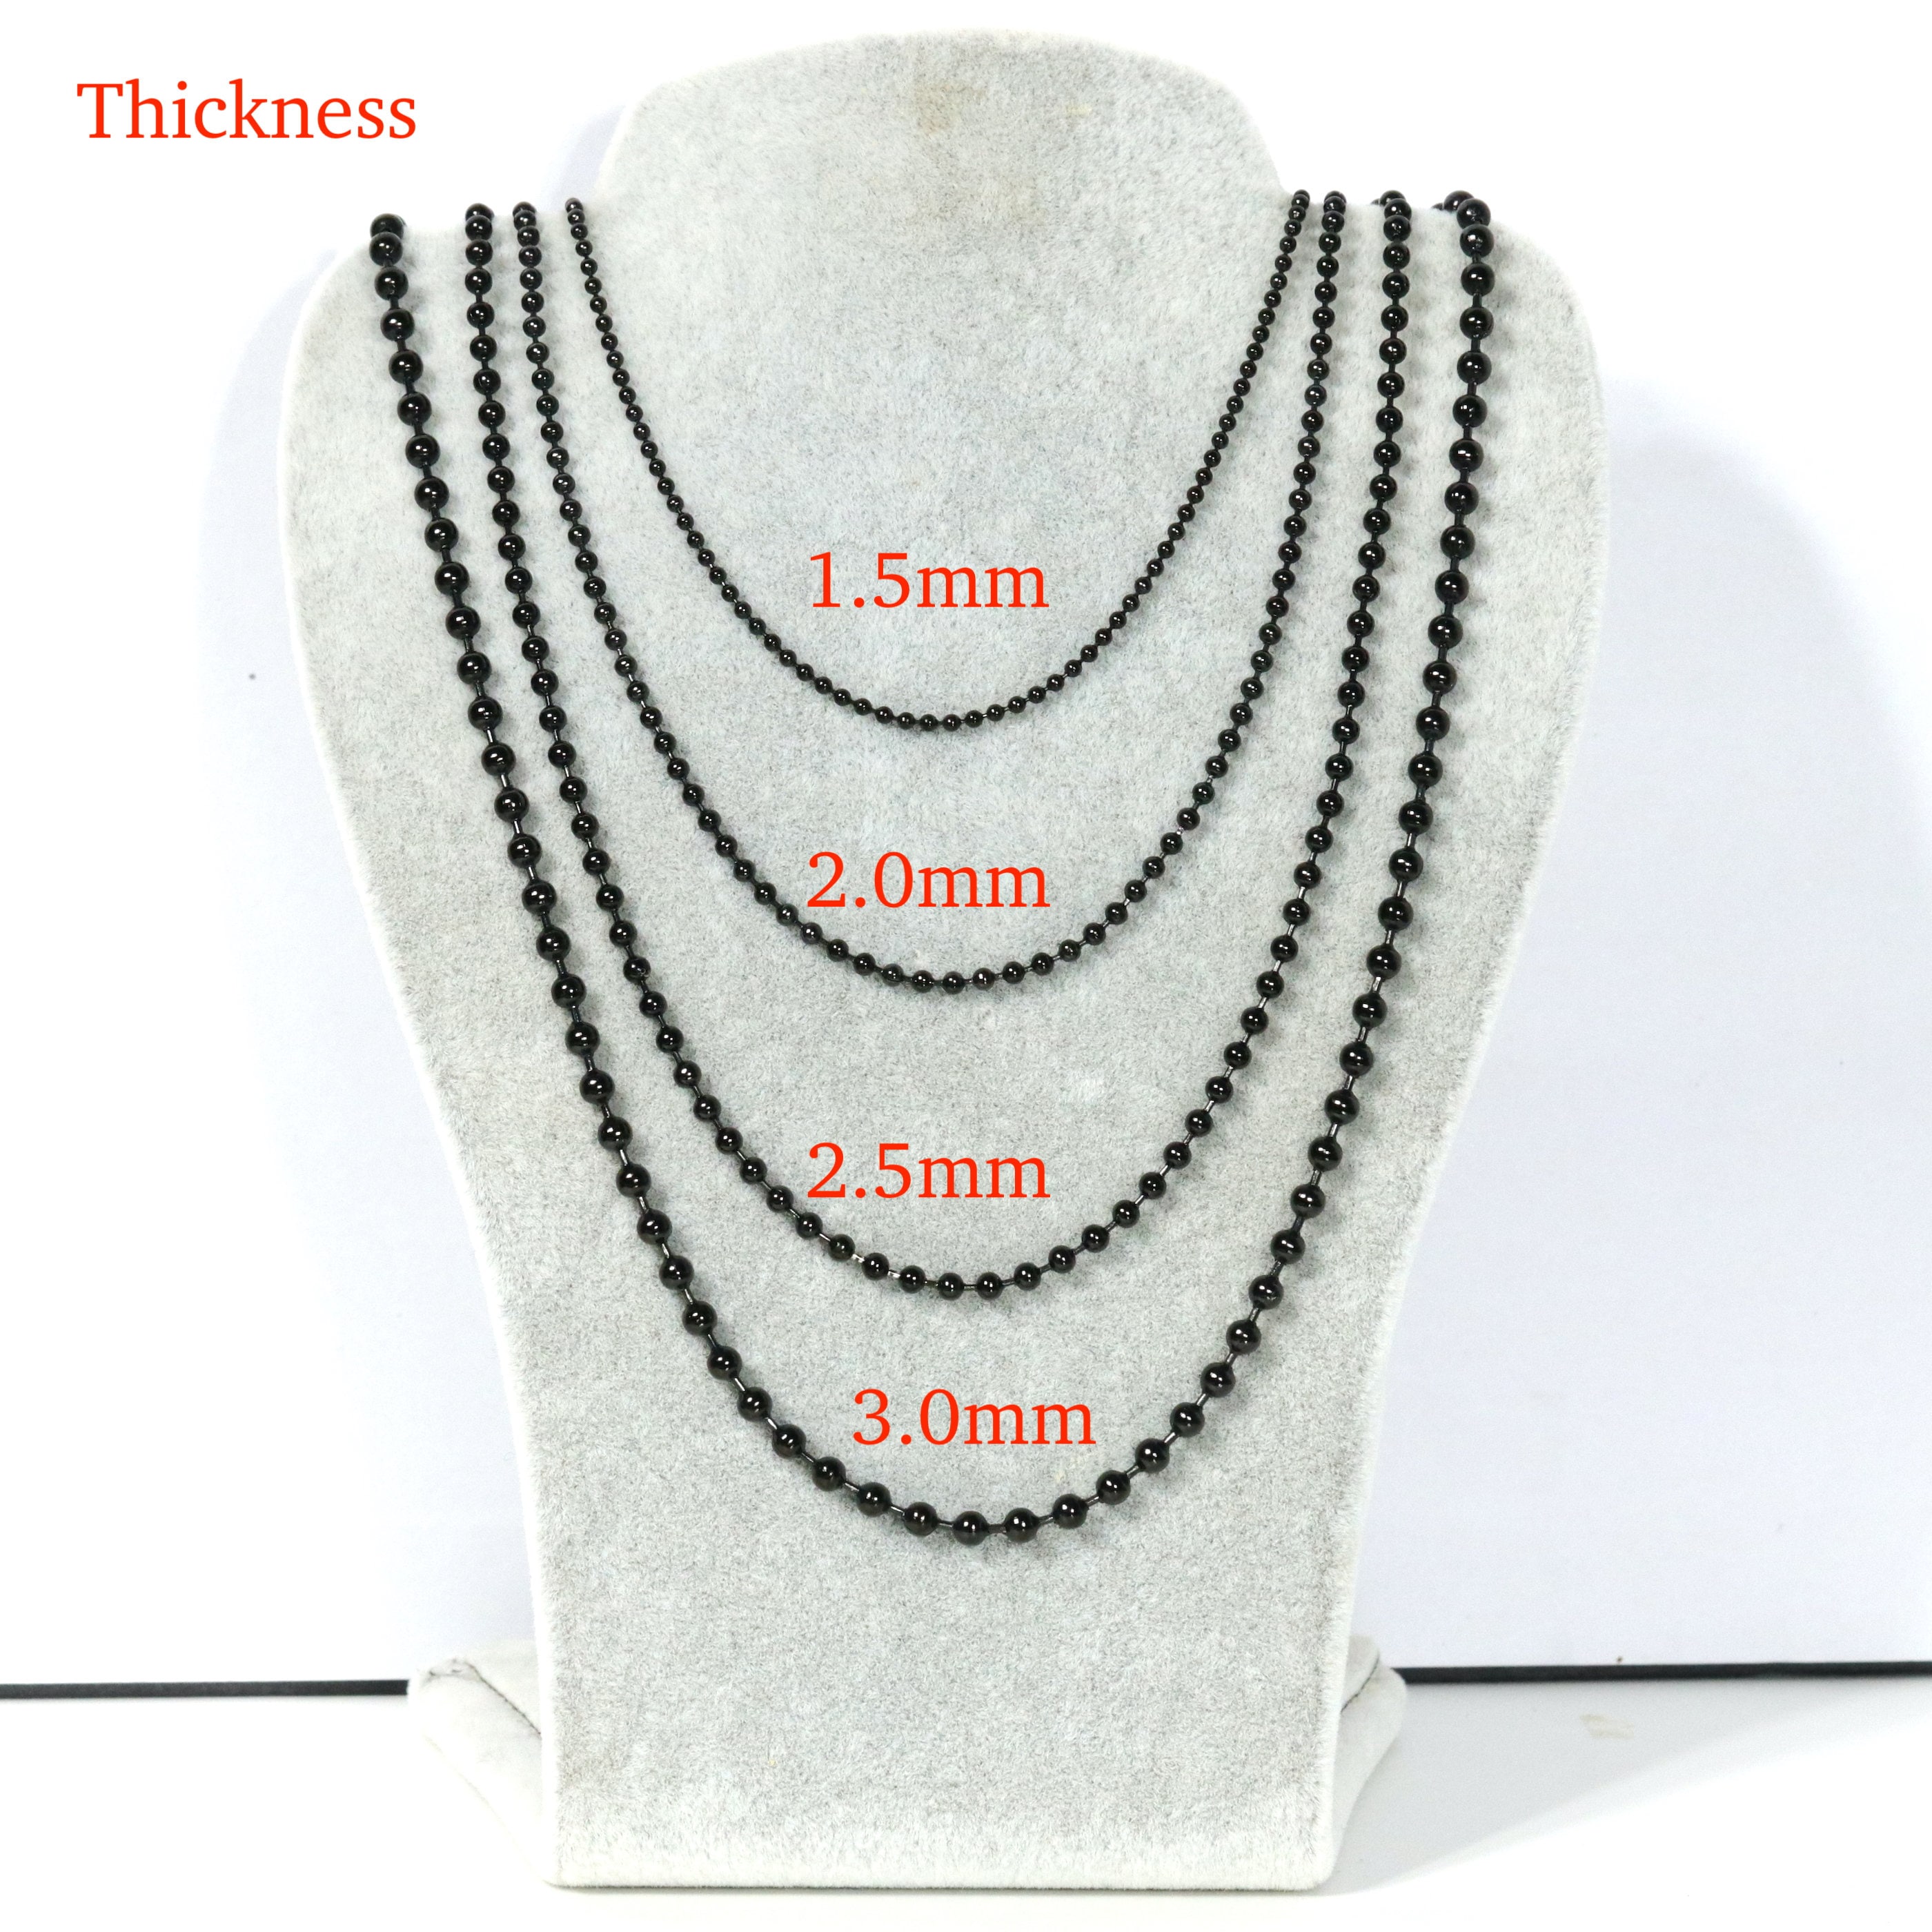 1.5mm Sterling Silver Bead Chain by the Foot or 16, 18, 20, 24, 30